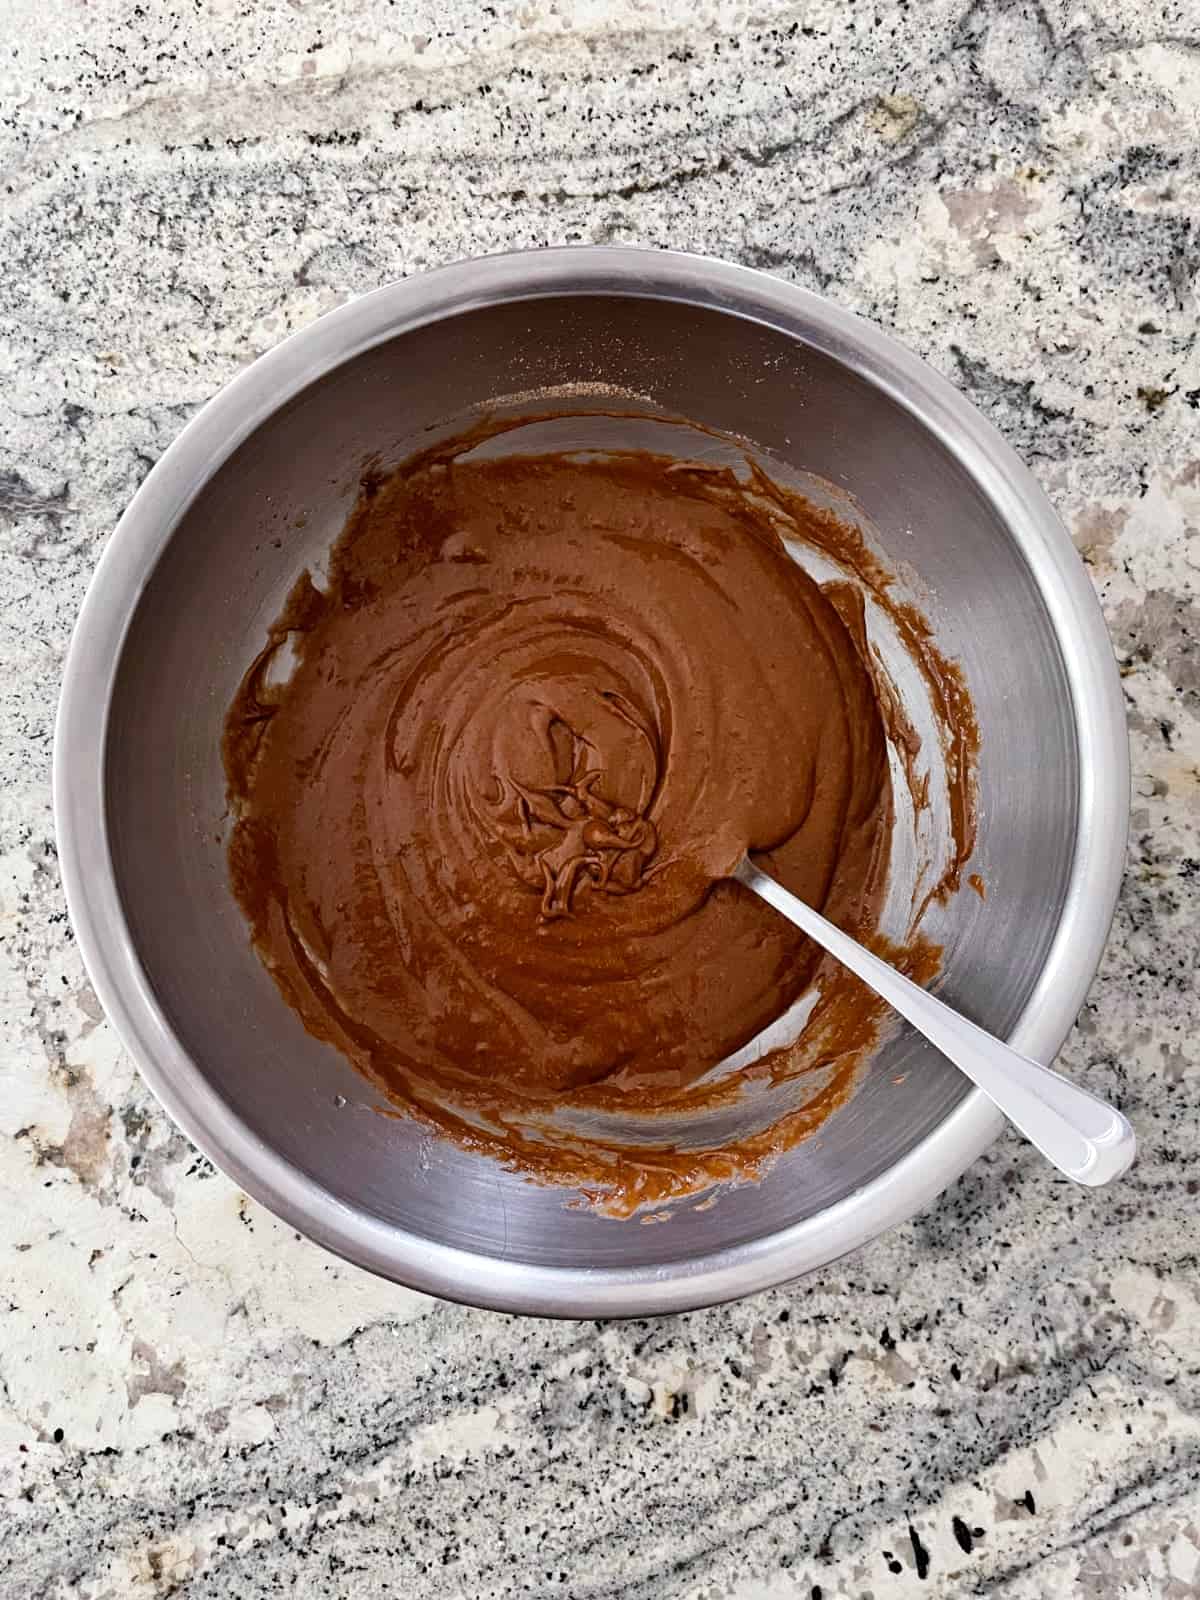 Devil's food cake mix combined with pumpkin puree in stainless mixing bowl on granite.